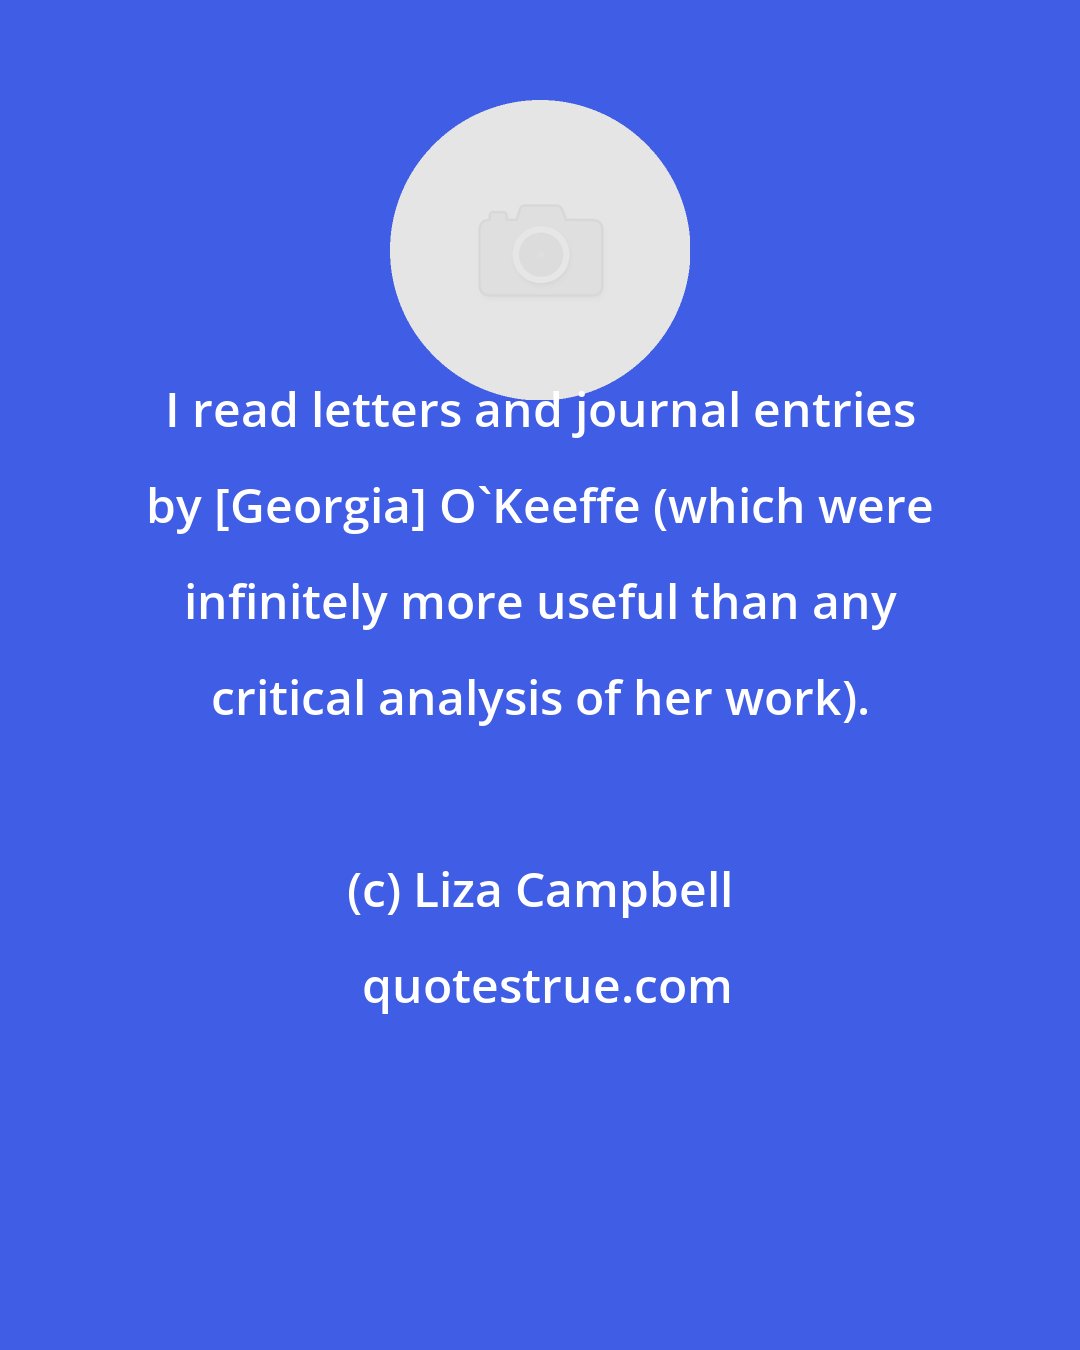 Liza Campbell: I read letters and journal entries by [Georgia] O'Keeffe (which were infinitely more useful than any critical analysis of her work).